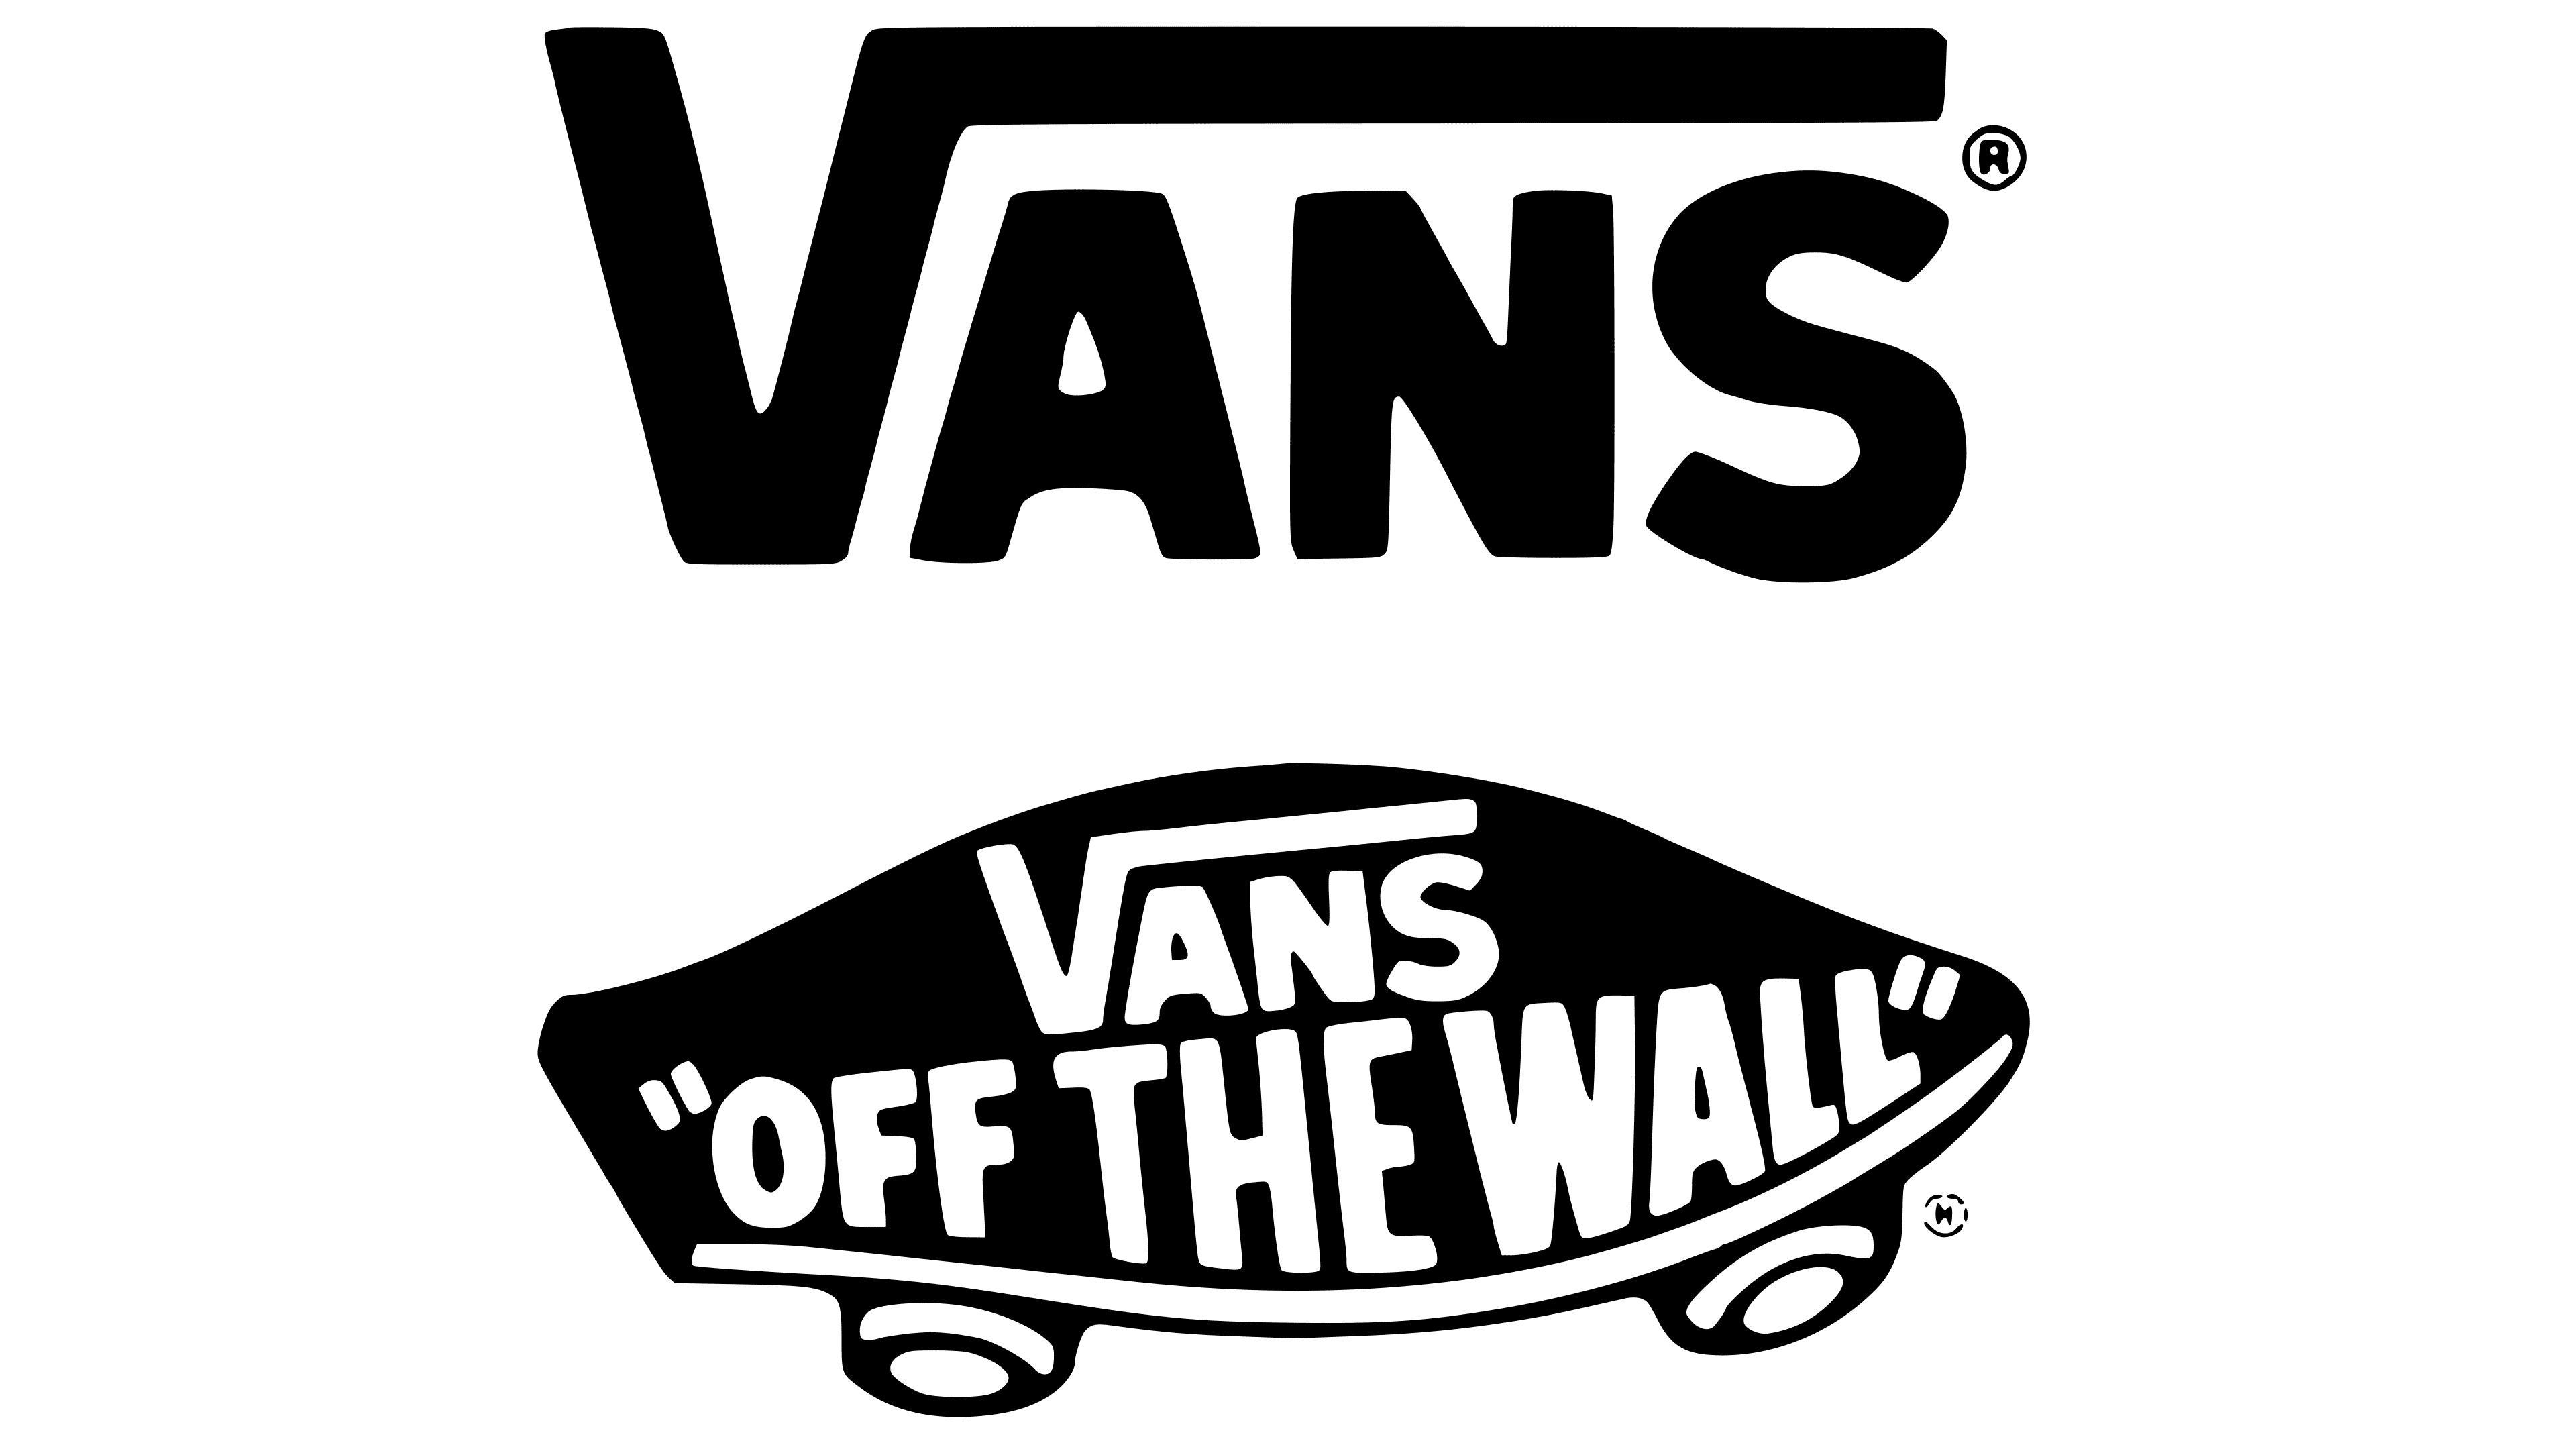 Vans: Youth culture inspired footwear, apparel, accessories, Black and white. 3840x2160 4K Wallpaper.